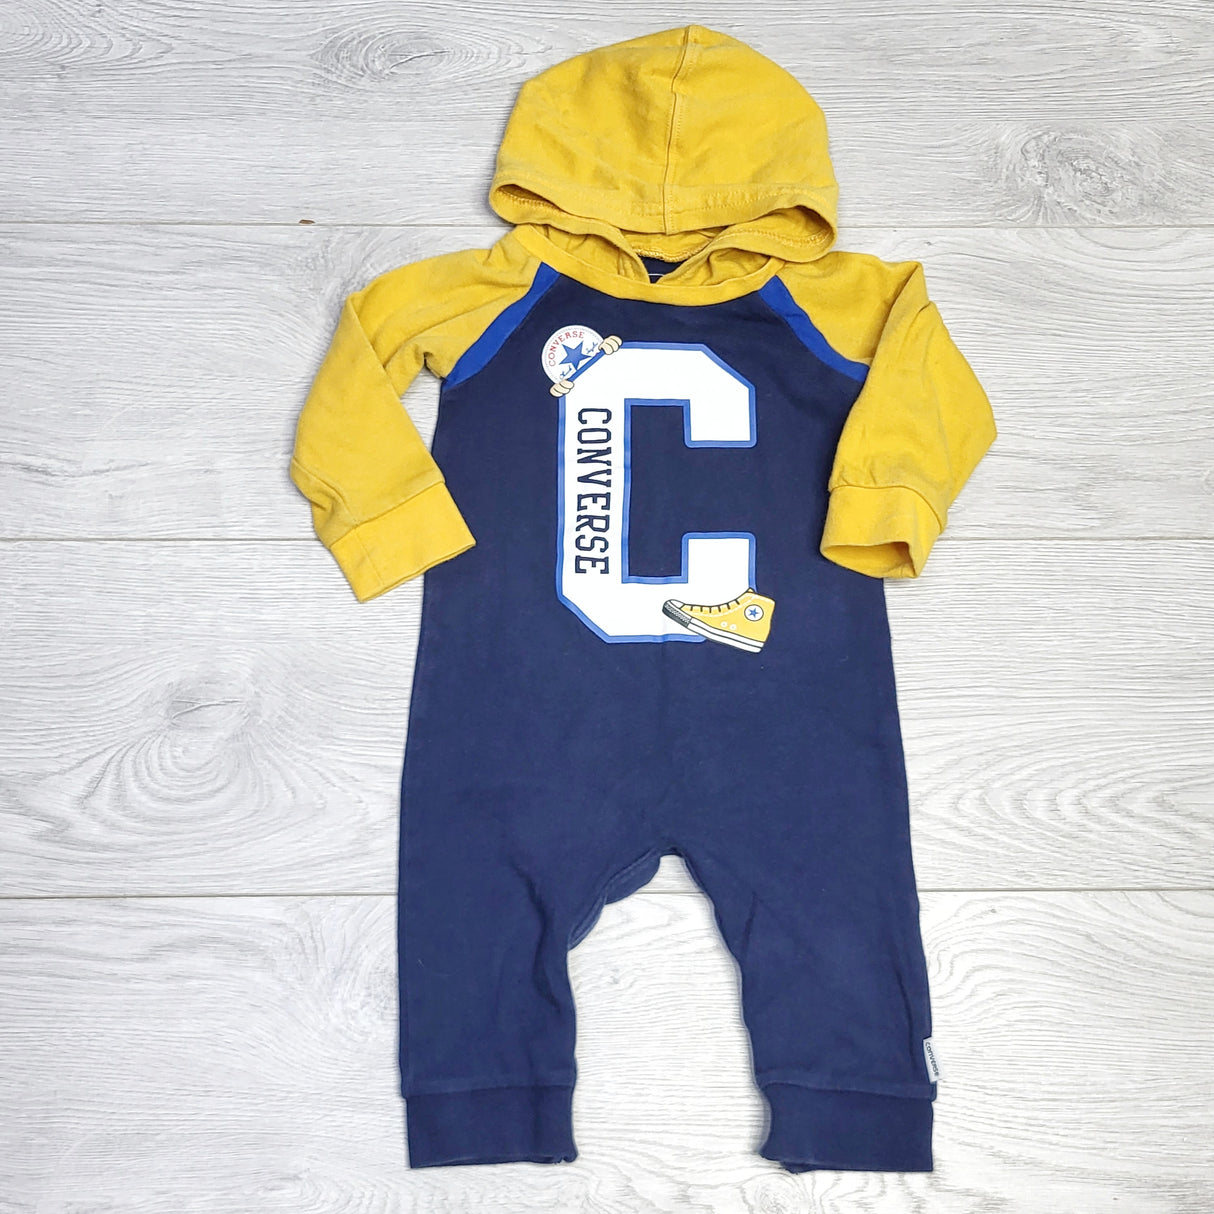 MSNDS11 - Converse navy and yellow hooded cotton romper. Size 9-12 months